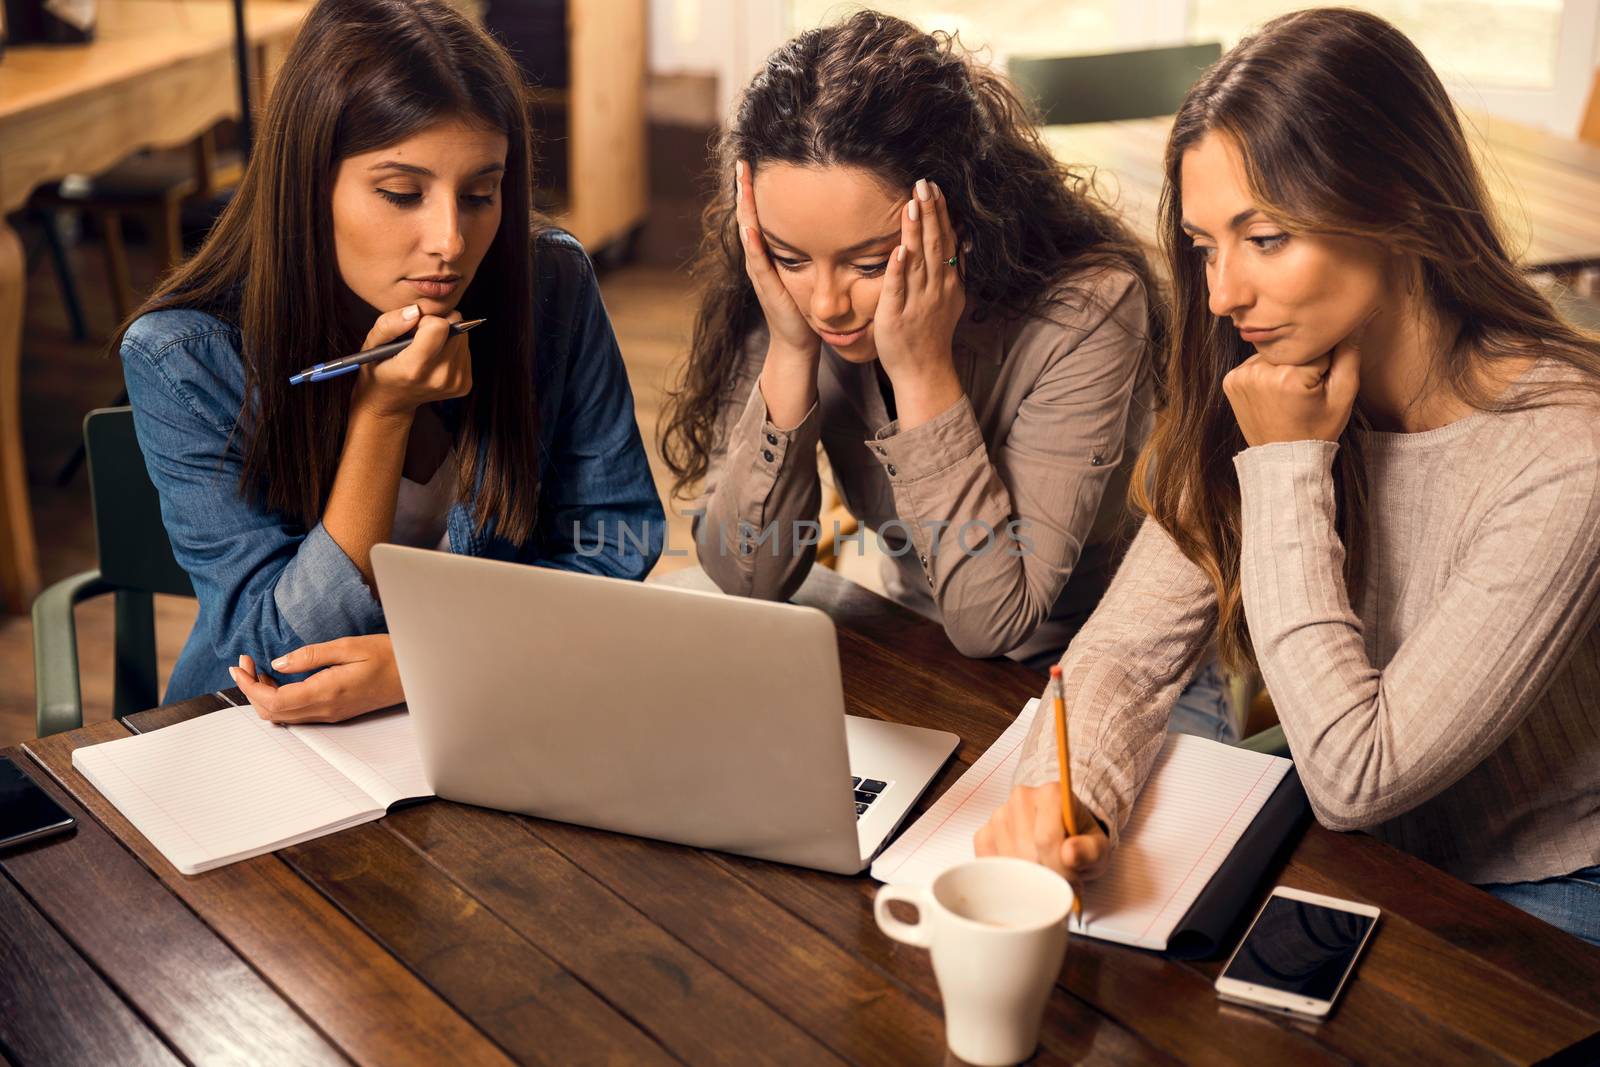 Group of friends studying together and worried with final exams